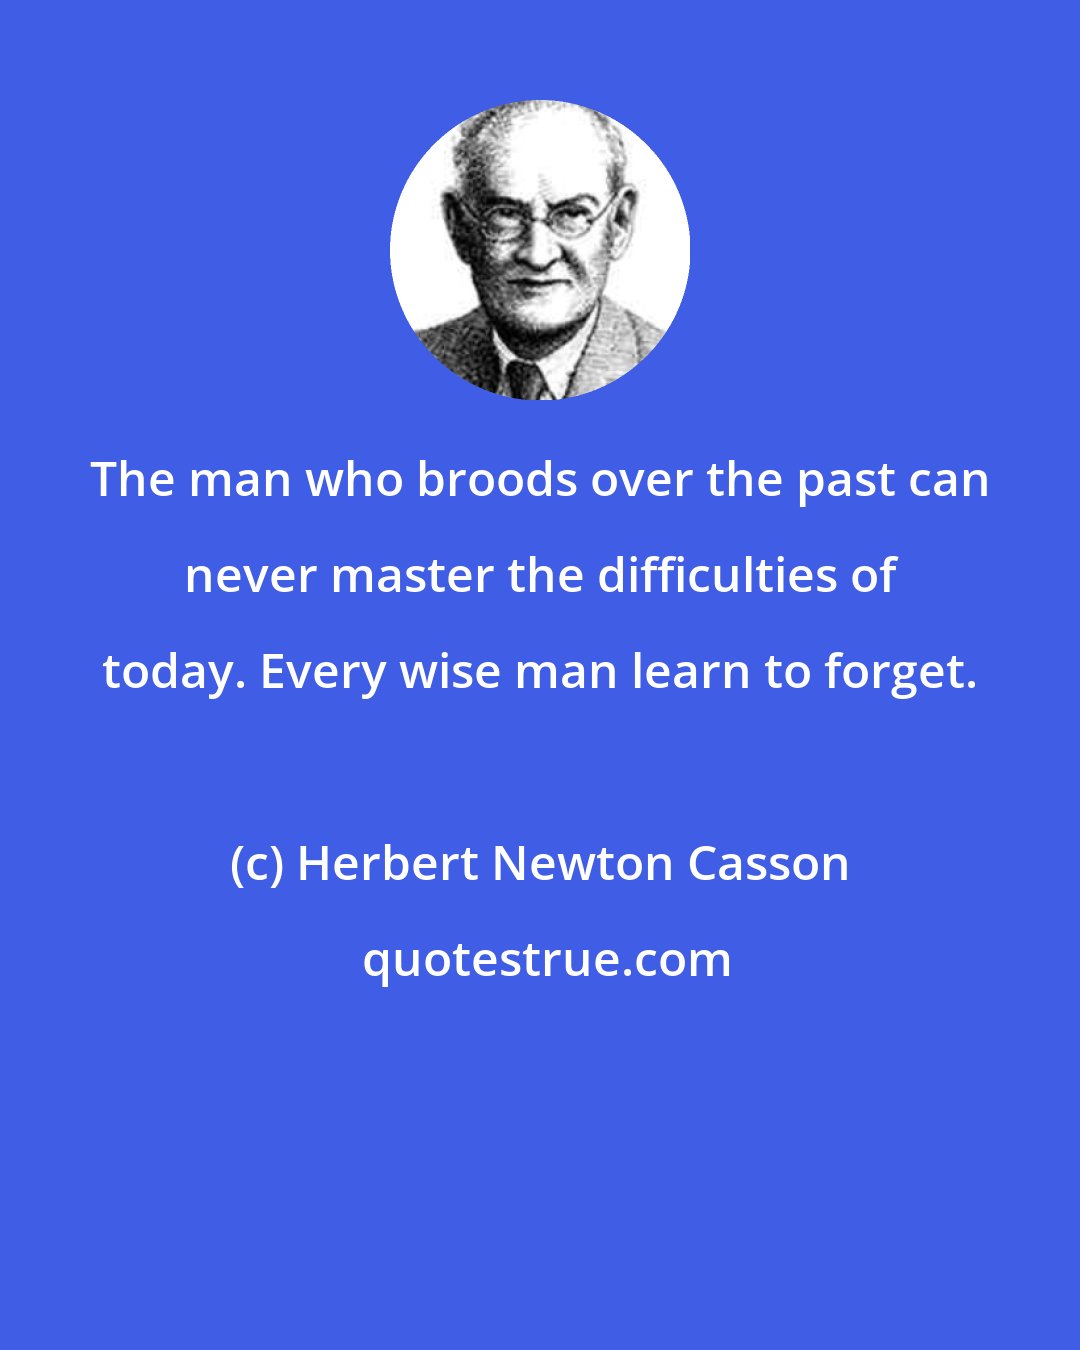 Herbert Newton Casson: The man who broods over the past can never master the difficulties of today. Every wise man learn to forget.